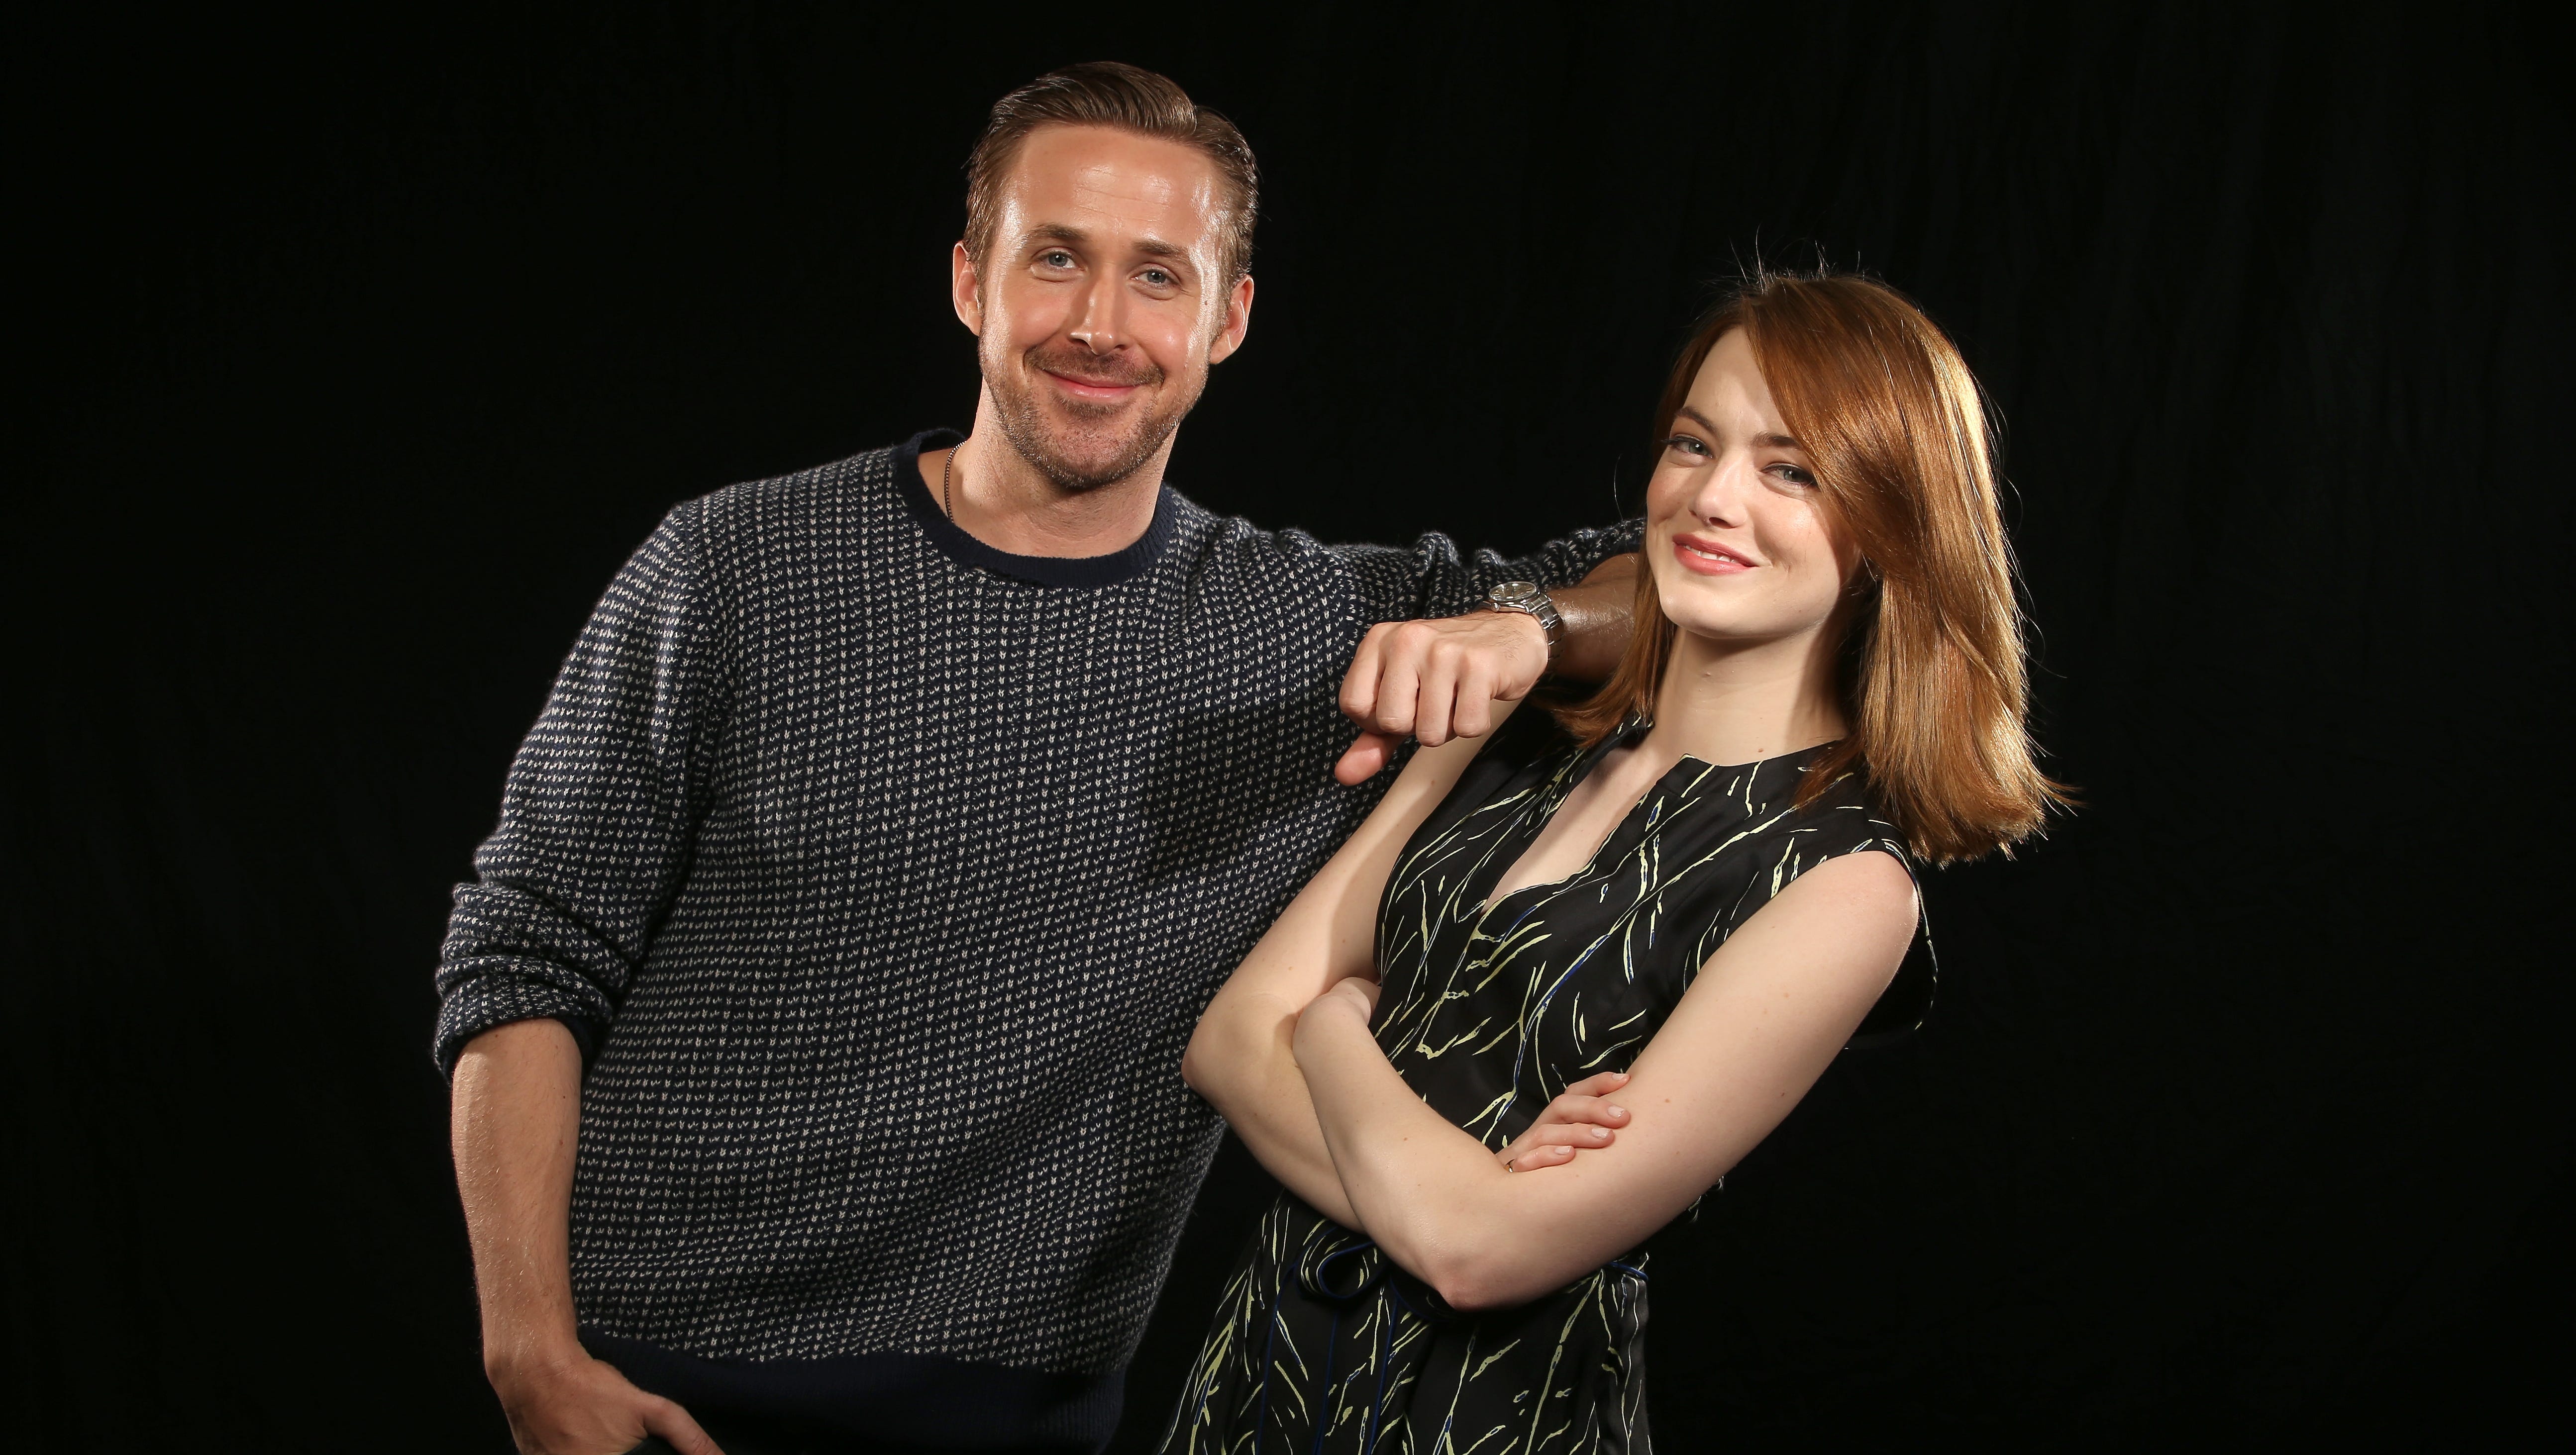 After La La Land Will Ryan Gosling And Emma Stone Dance Together Again